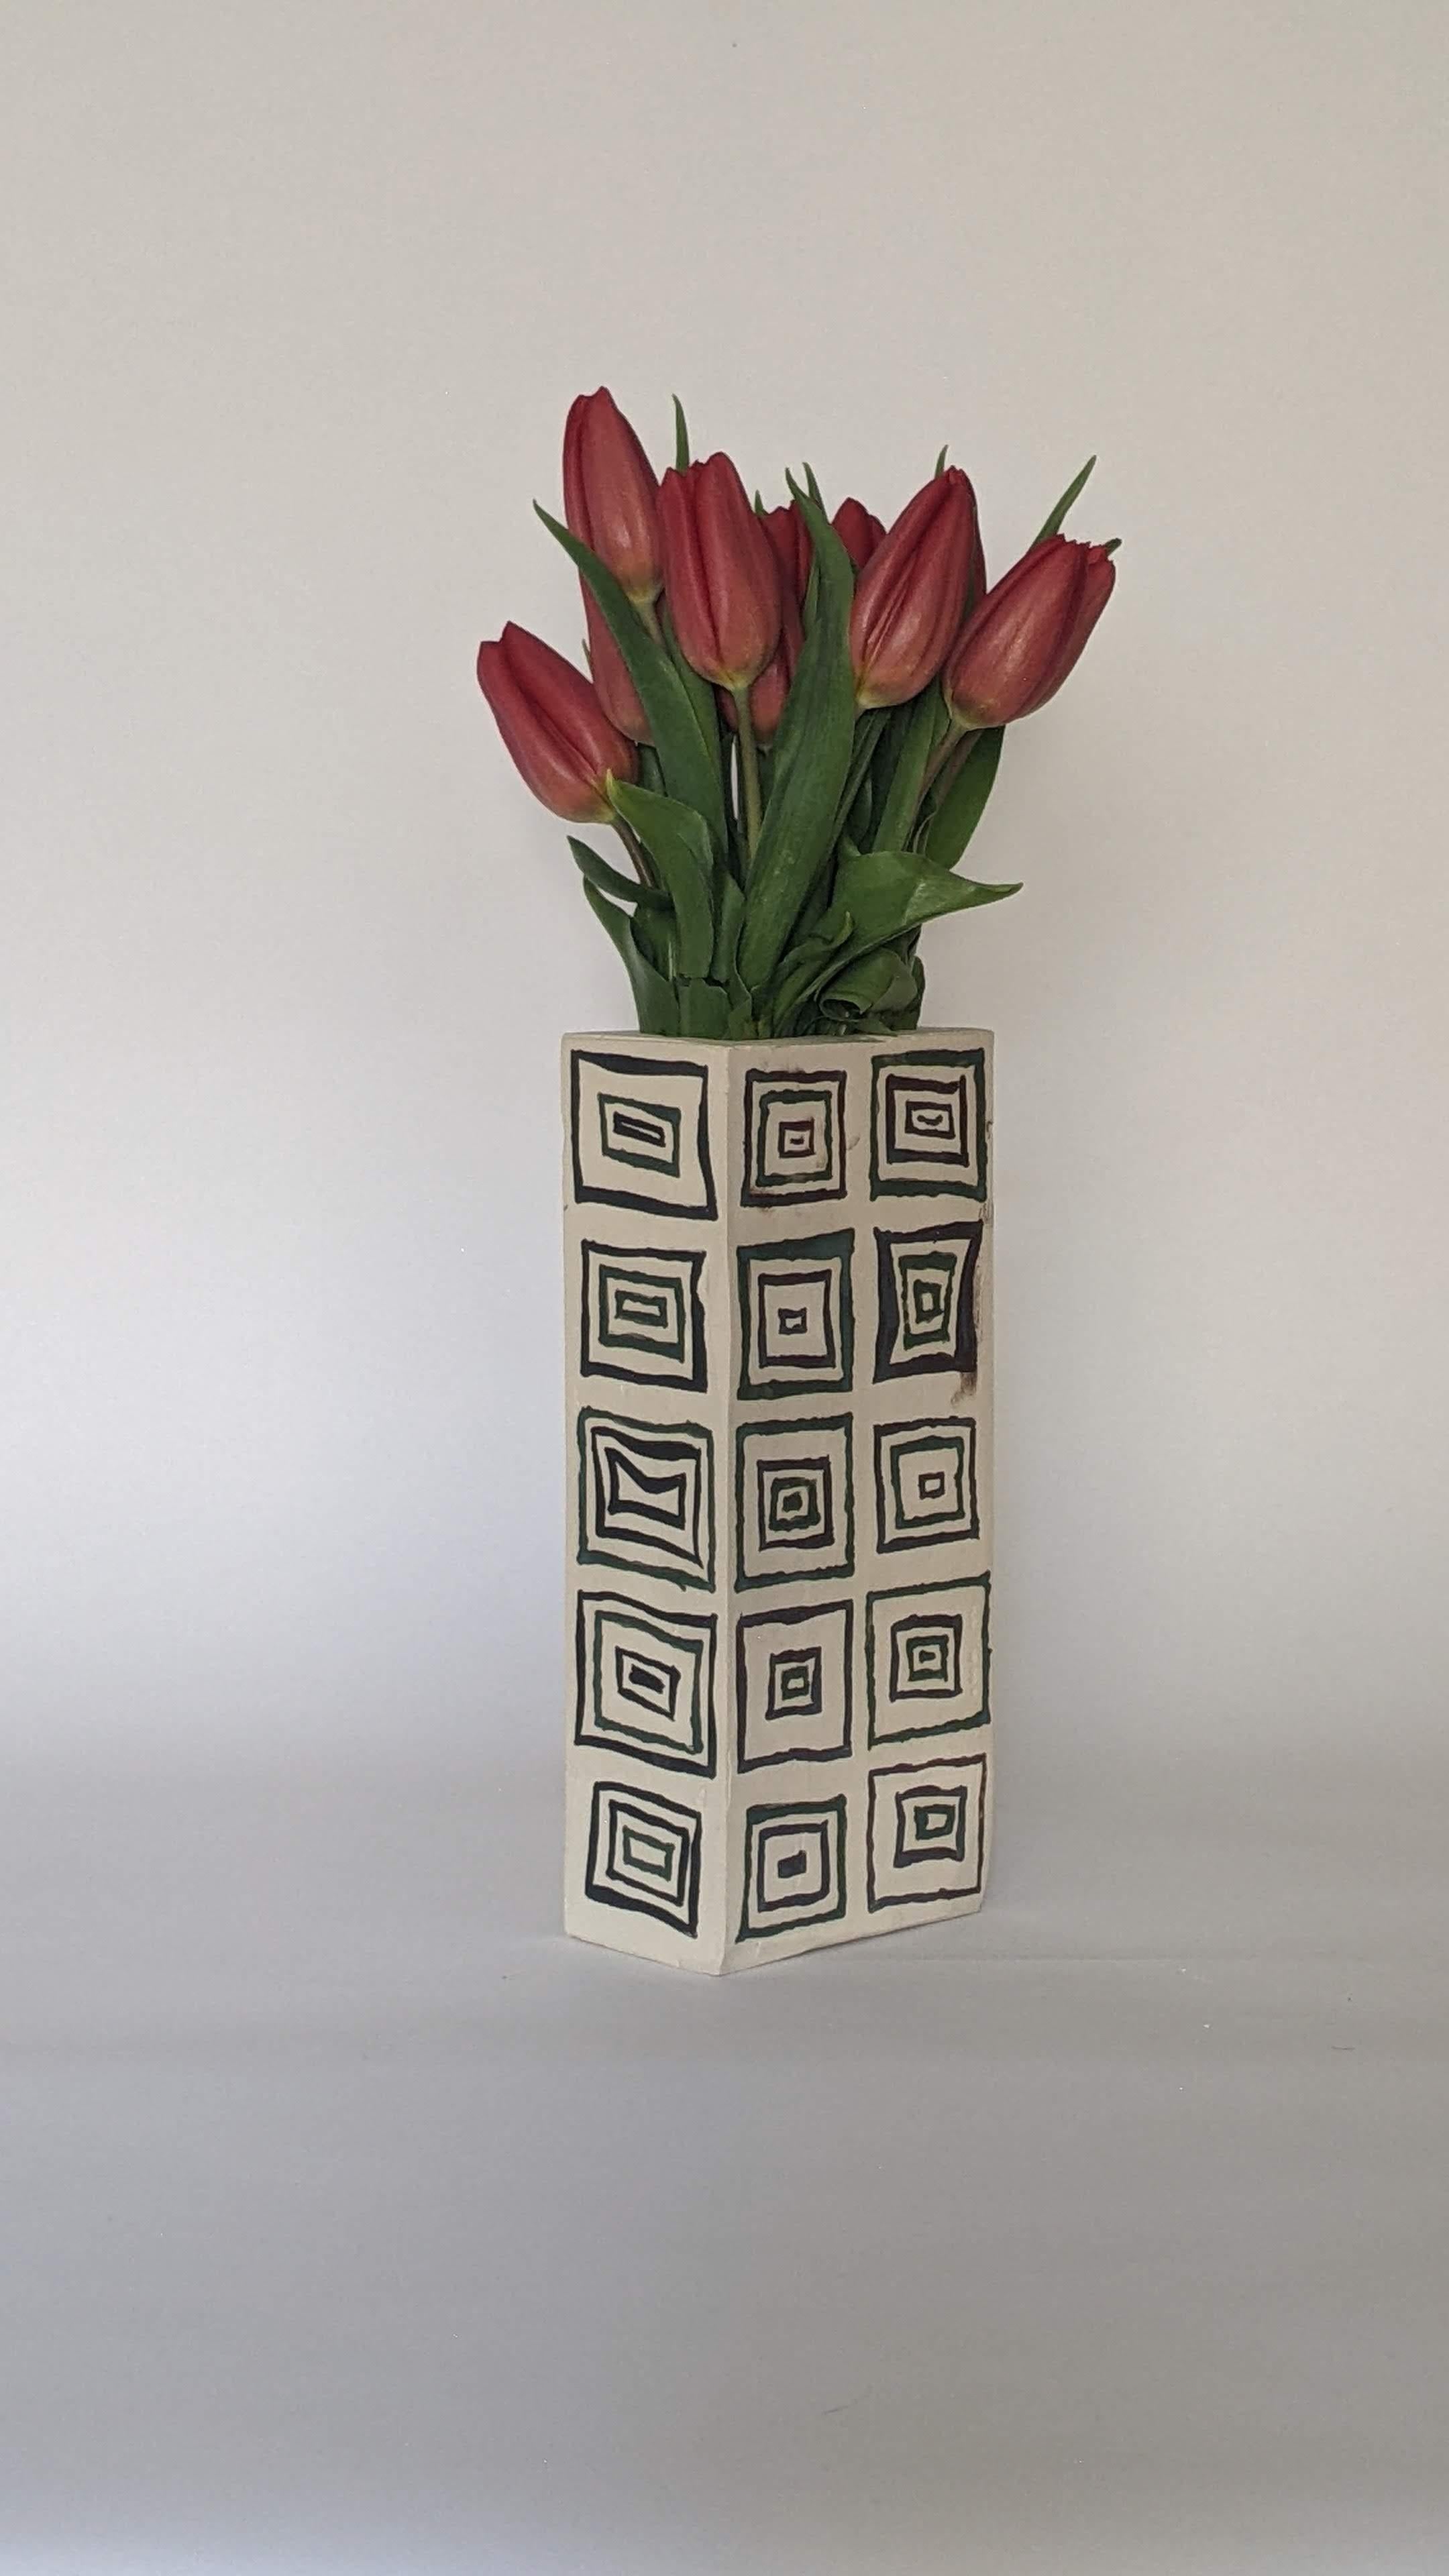 This meticulously crafted hand-painted and hand-glazed glazed ceramic vase design features a sleek modern rectangle hollow brick form painted with an array of hand-drawn and hand-painted rectangles. openings. Each vase is individually slip-cast,